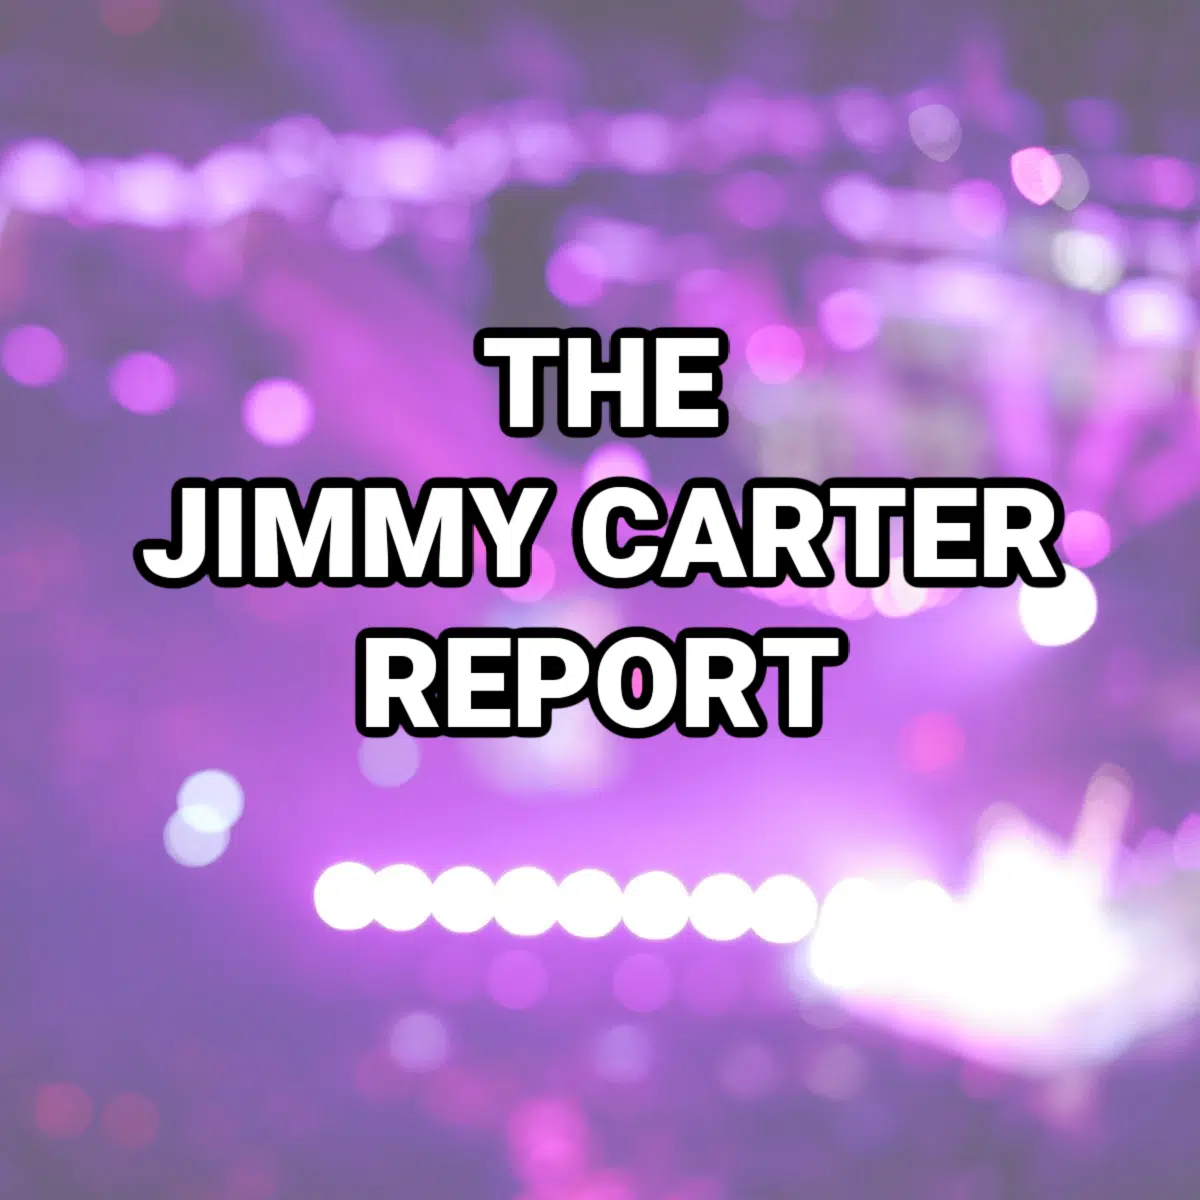 The Jimmy Carter Report April 6, 2022